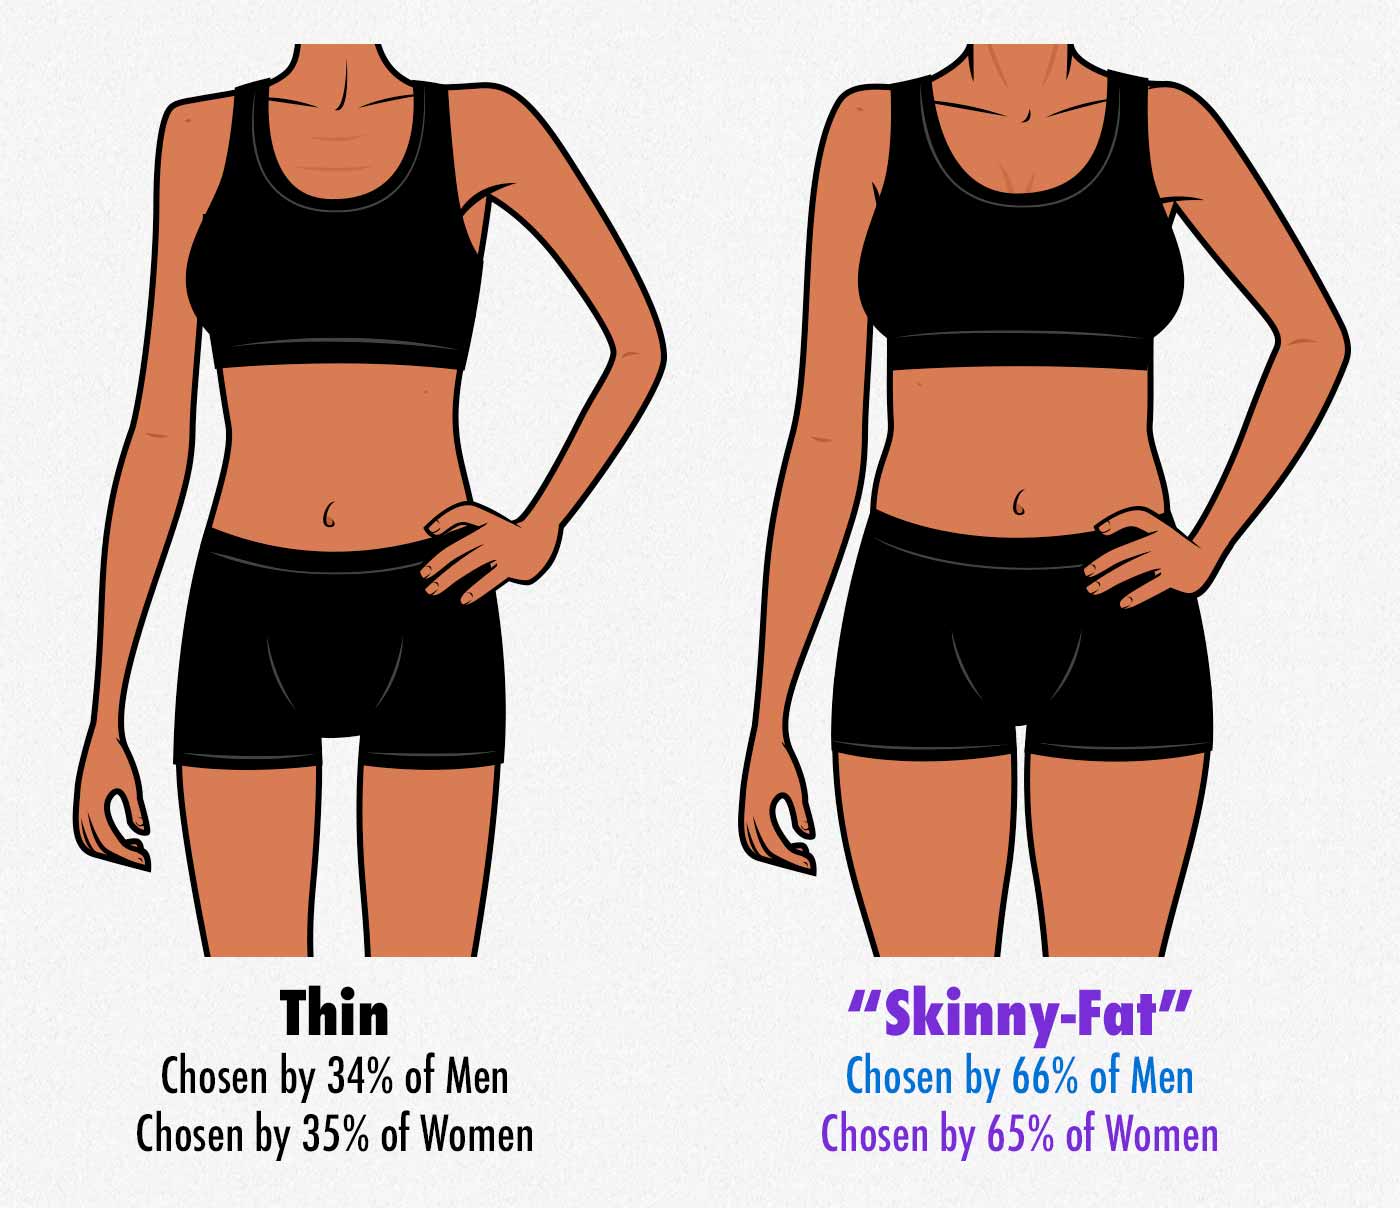 Survey results showing that being skinny-fat is more attractive than being thin.